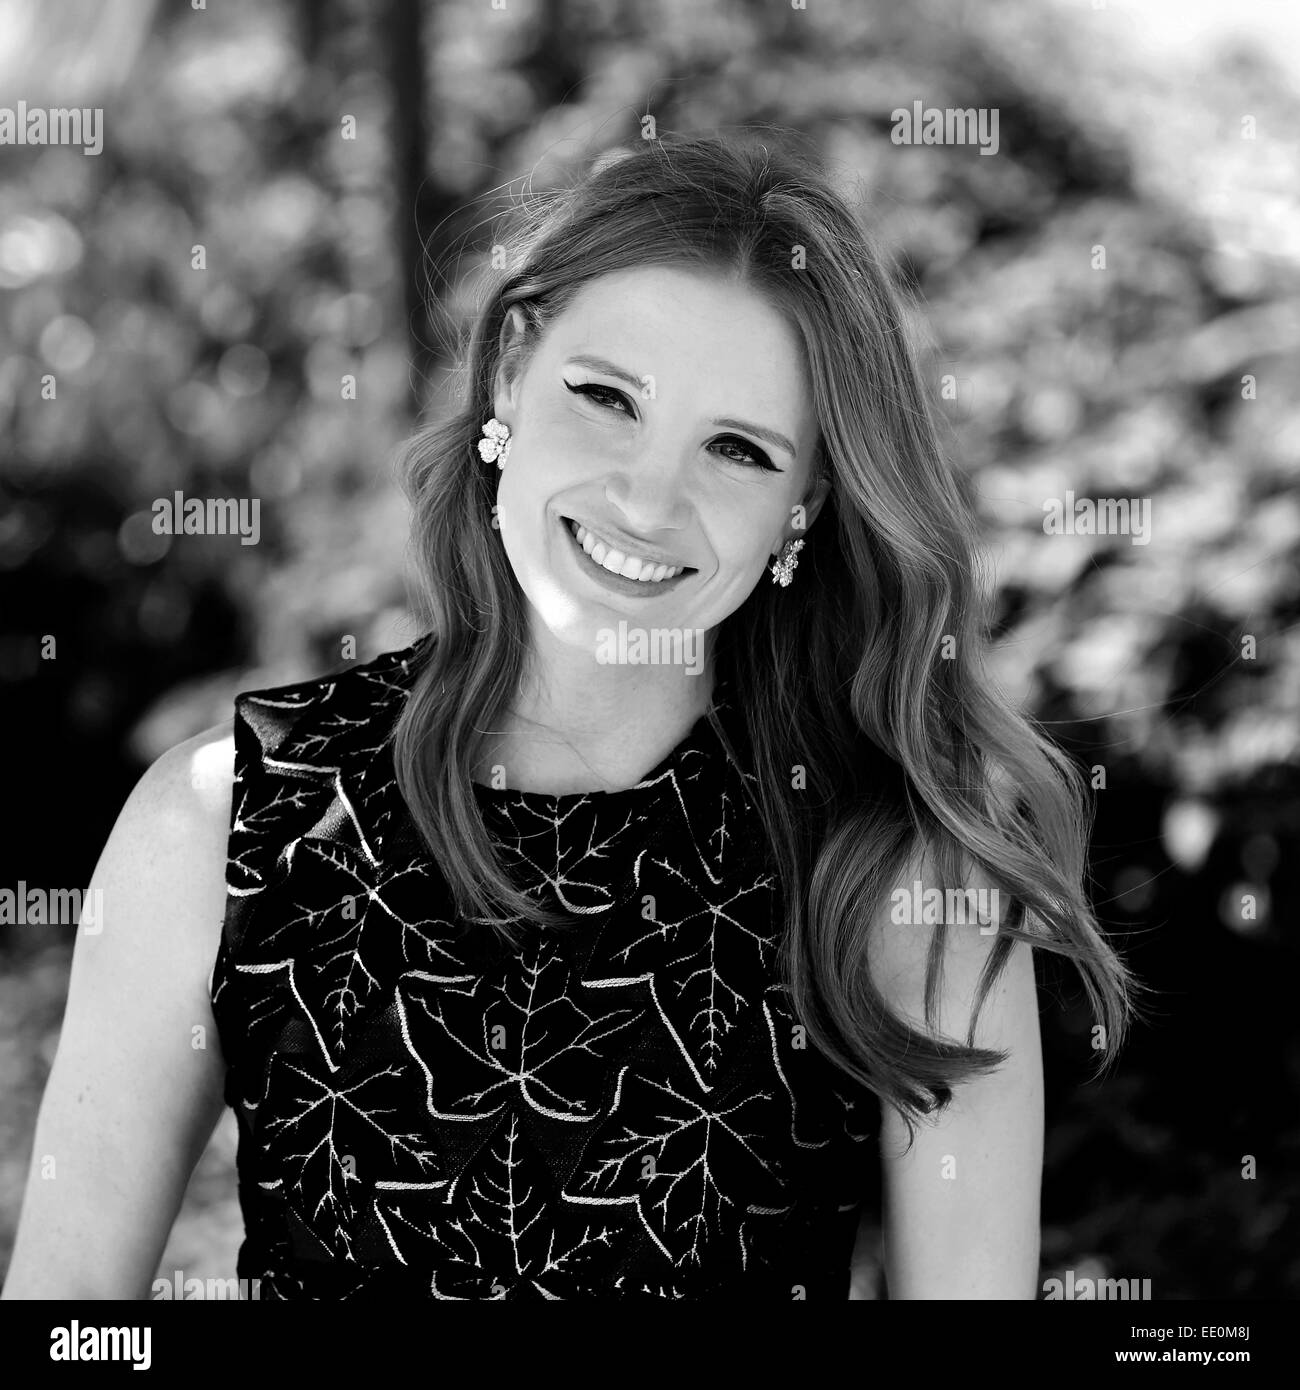 CANNES, FRANCE - MAY 18: Jessica Chastain attends the 'The Disappearance Of Eleanor Rigby' photo-call during the 67th Cannes Fil Stock Photo